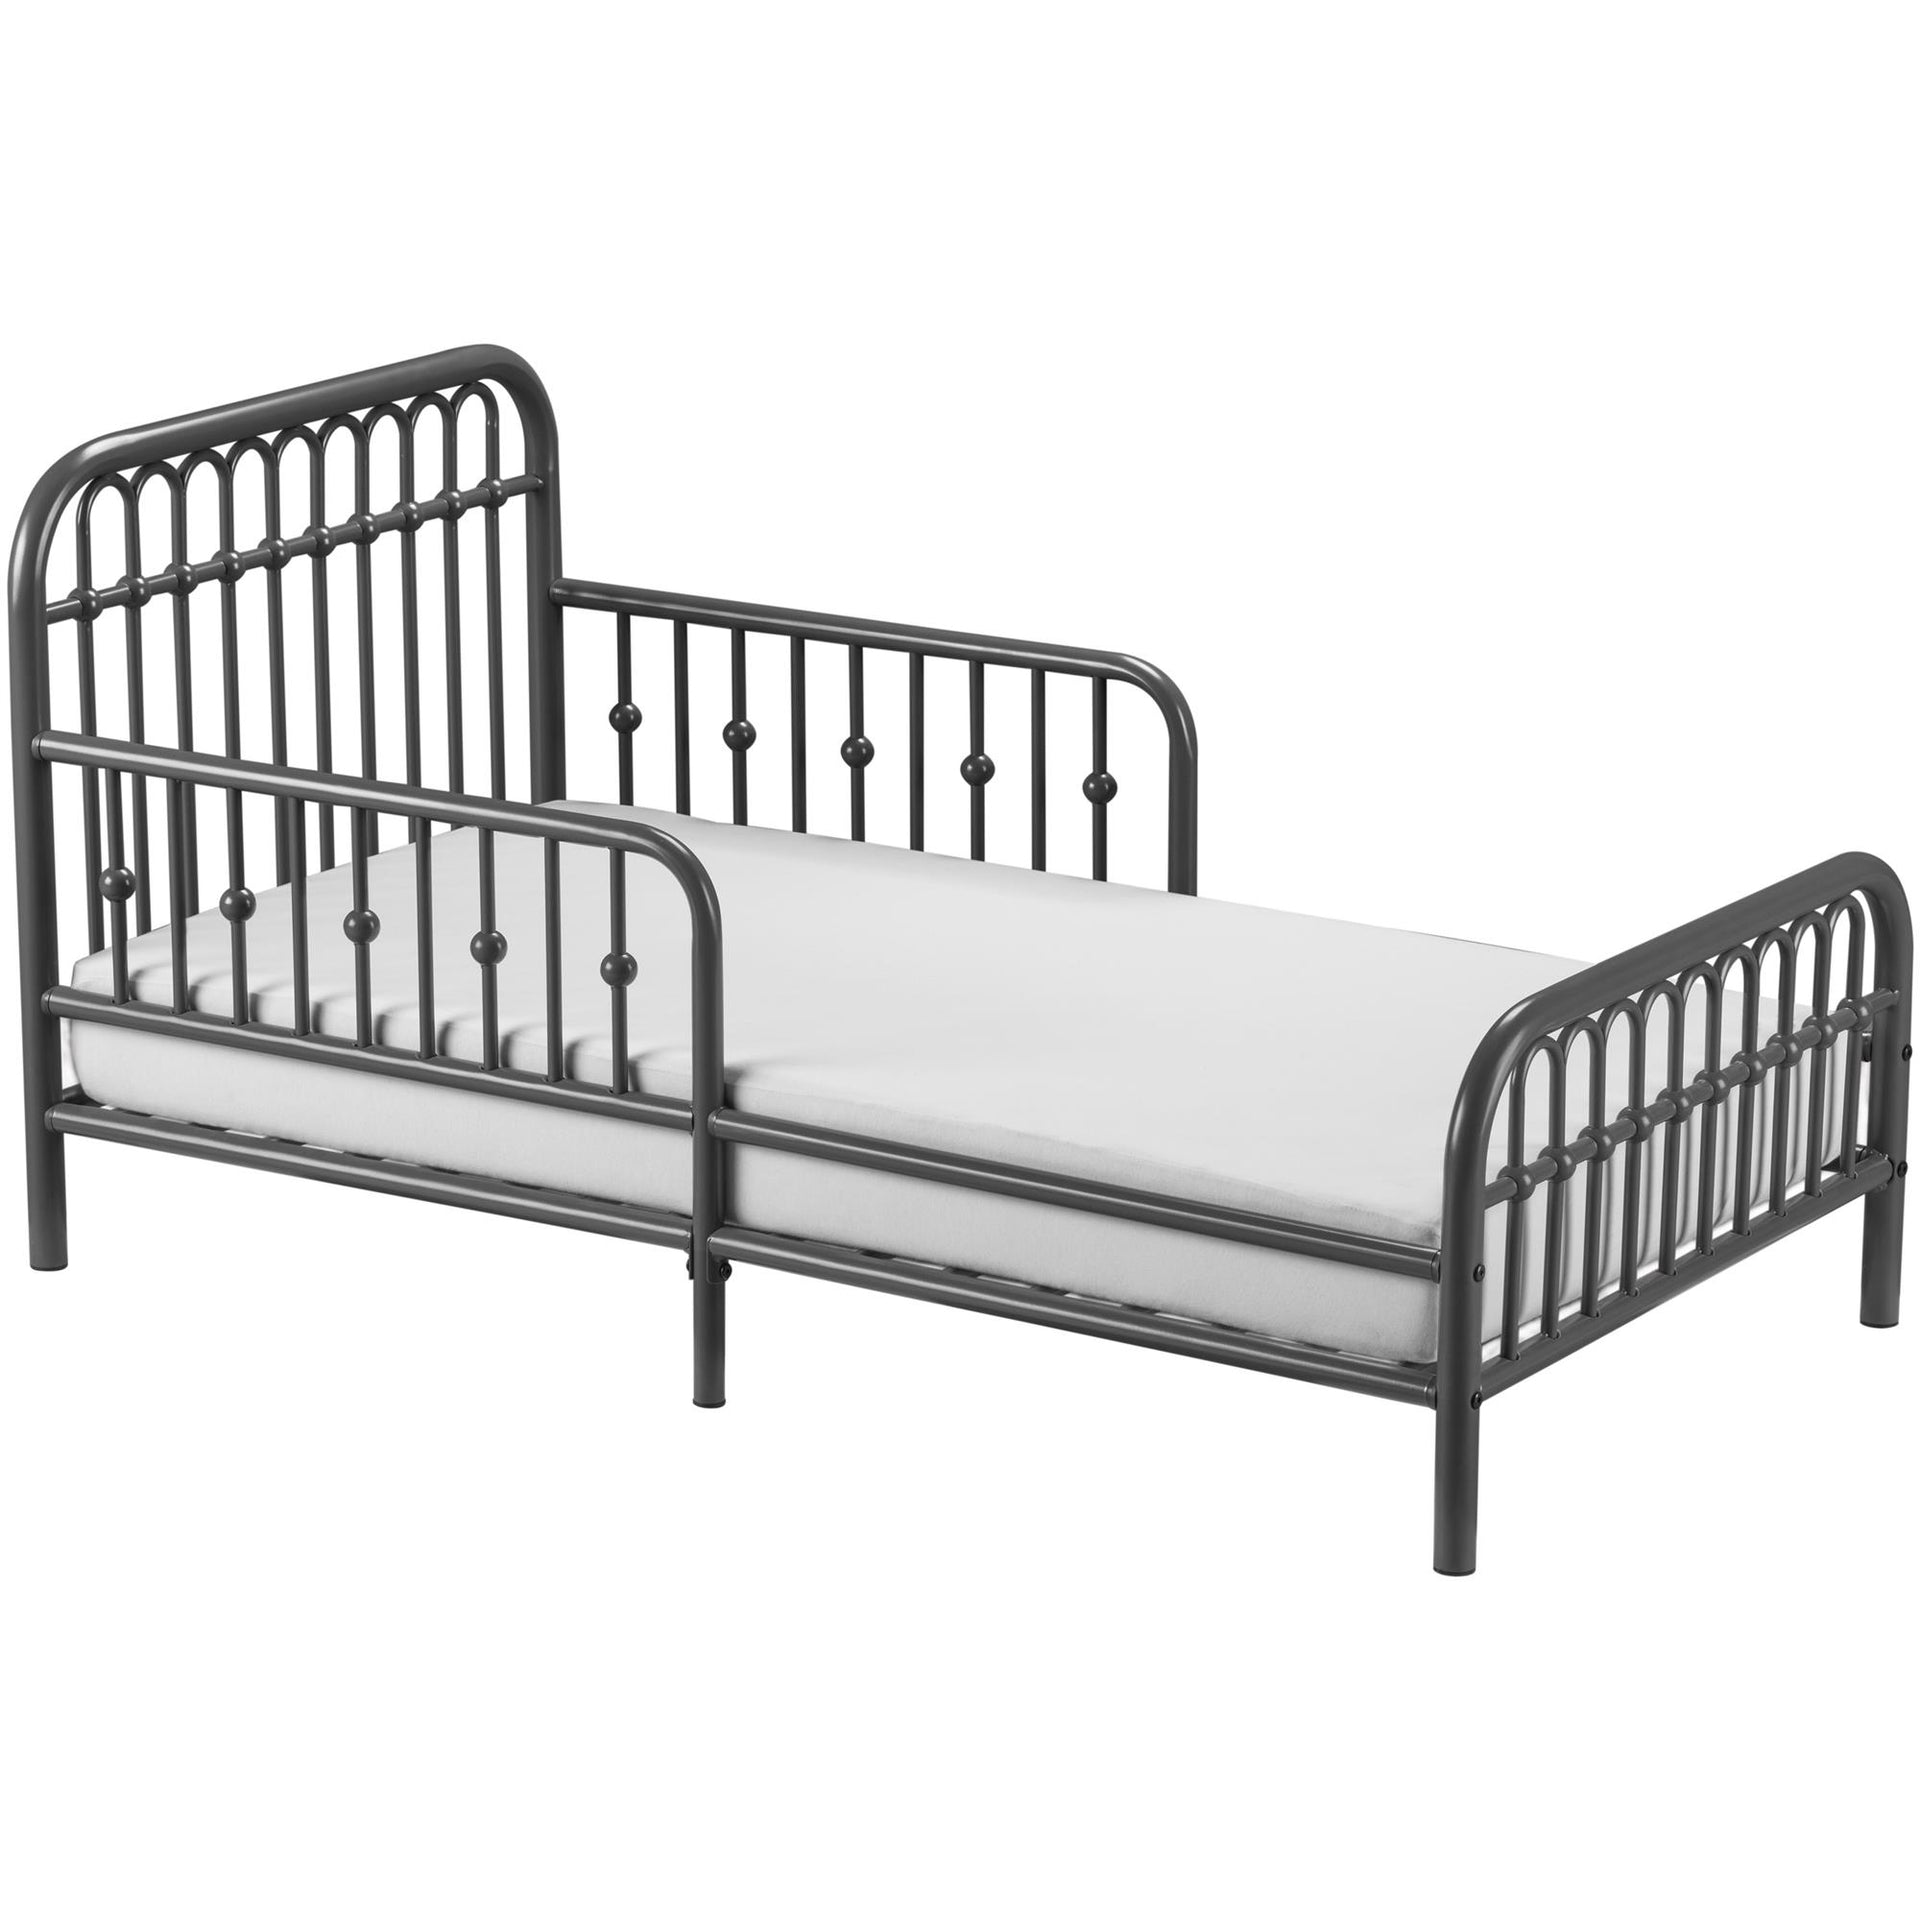 Monarch Hill Ivy Metal Toddler Bed - Graphite Grey